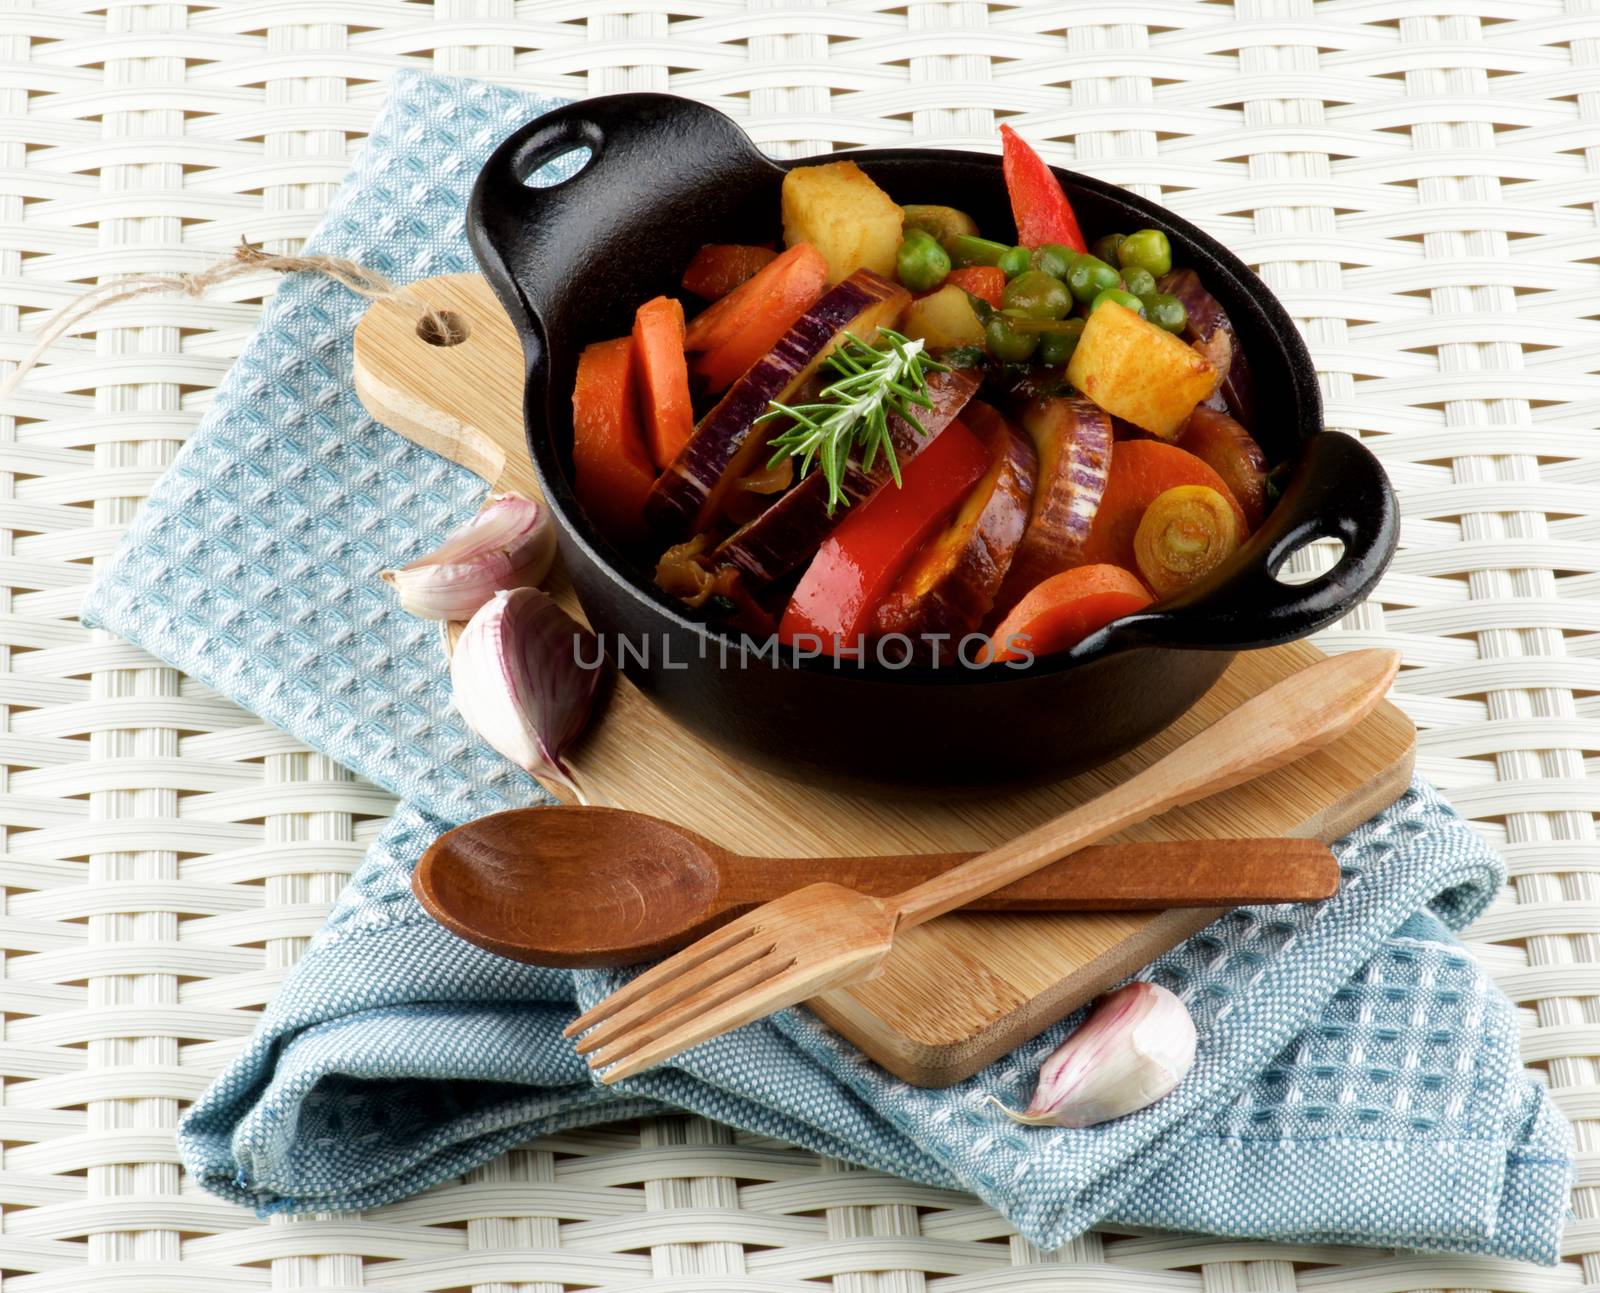 Delicious Homemade Colorful Vegetables Ragout with Striped Eggplant, Carrots, Potatoes, Red Bell Pepper and Green Pea in Black Iron Stewpot with Wooden Fork and Spoon closeup Blue Napkin on Wicker background